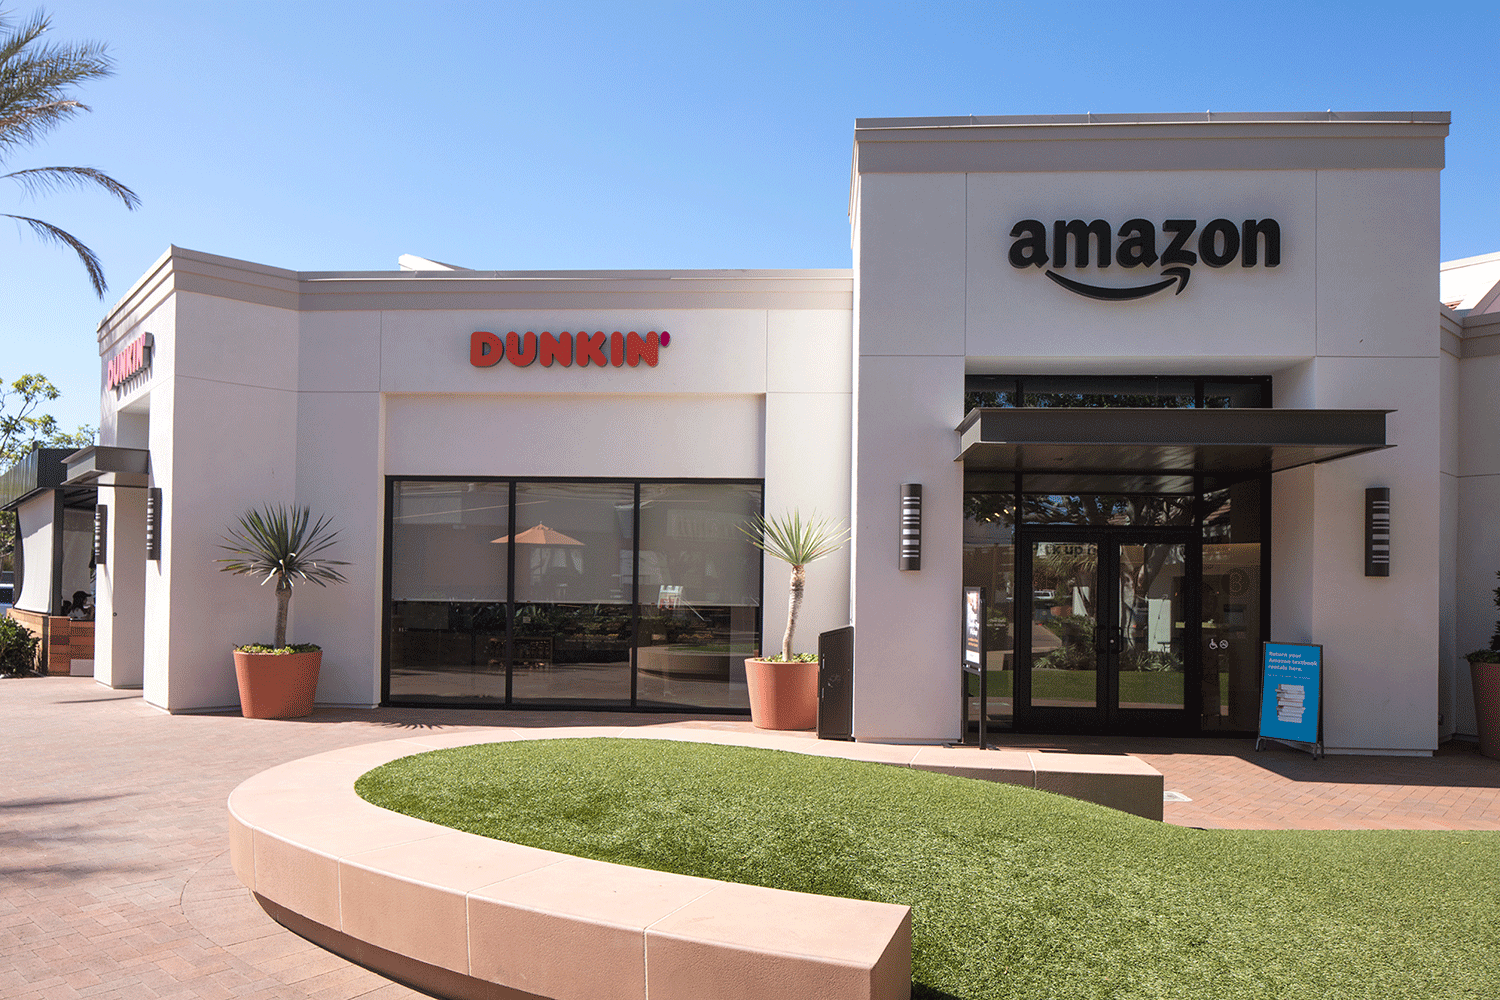  Exterior view of Amazon and Dunkin' at University Center